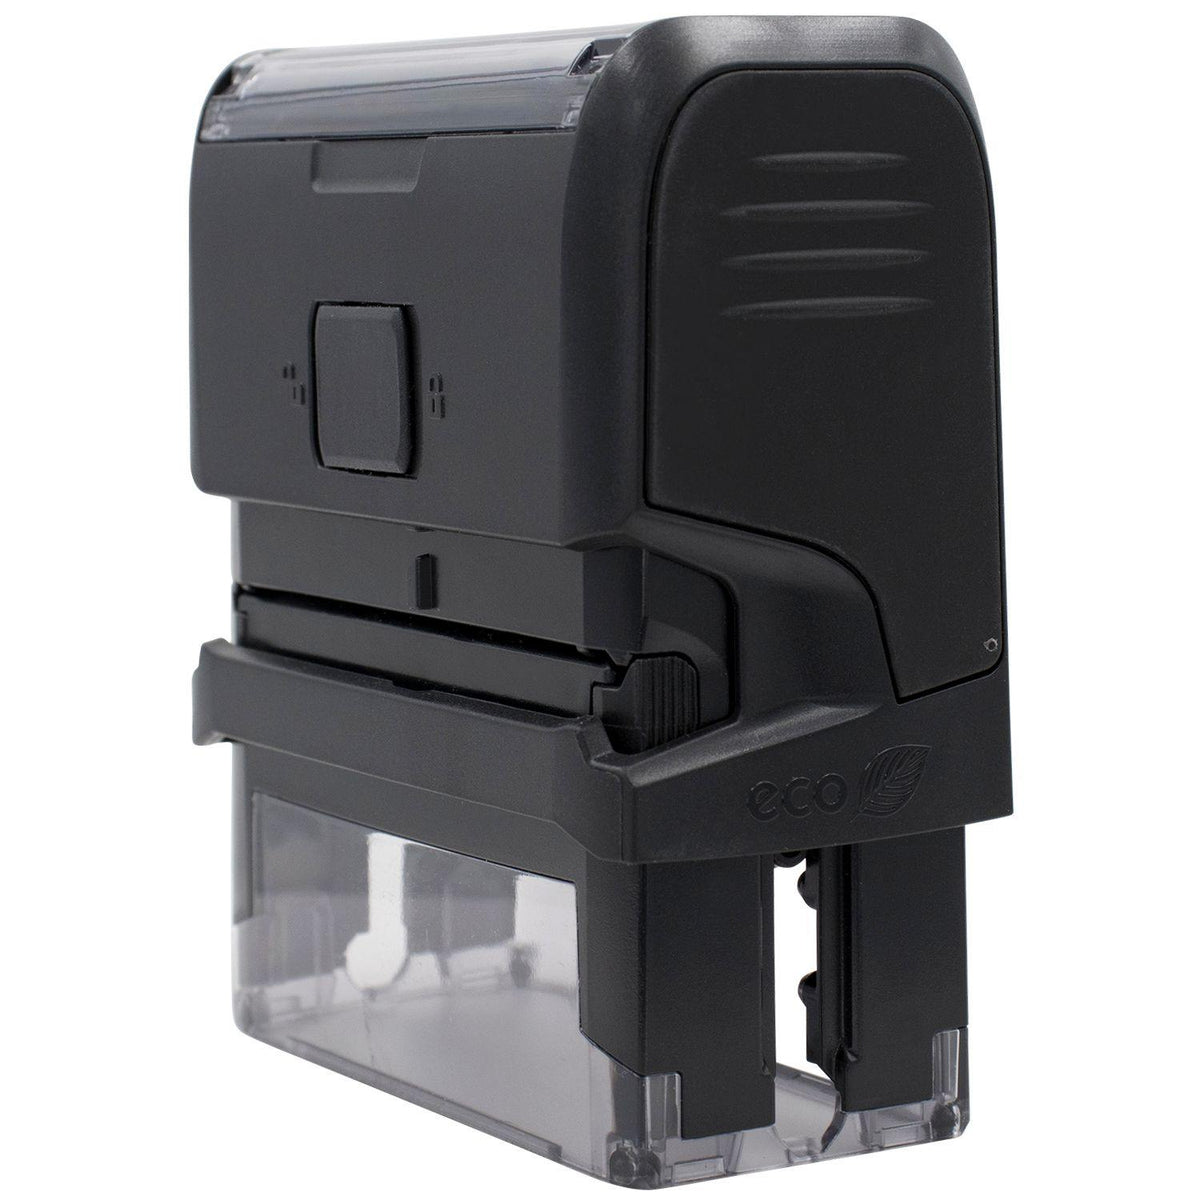 Side View of Large Self-Inking Client&#39;s Copy Stamp at an Angle